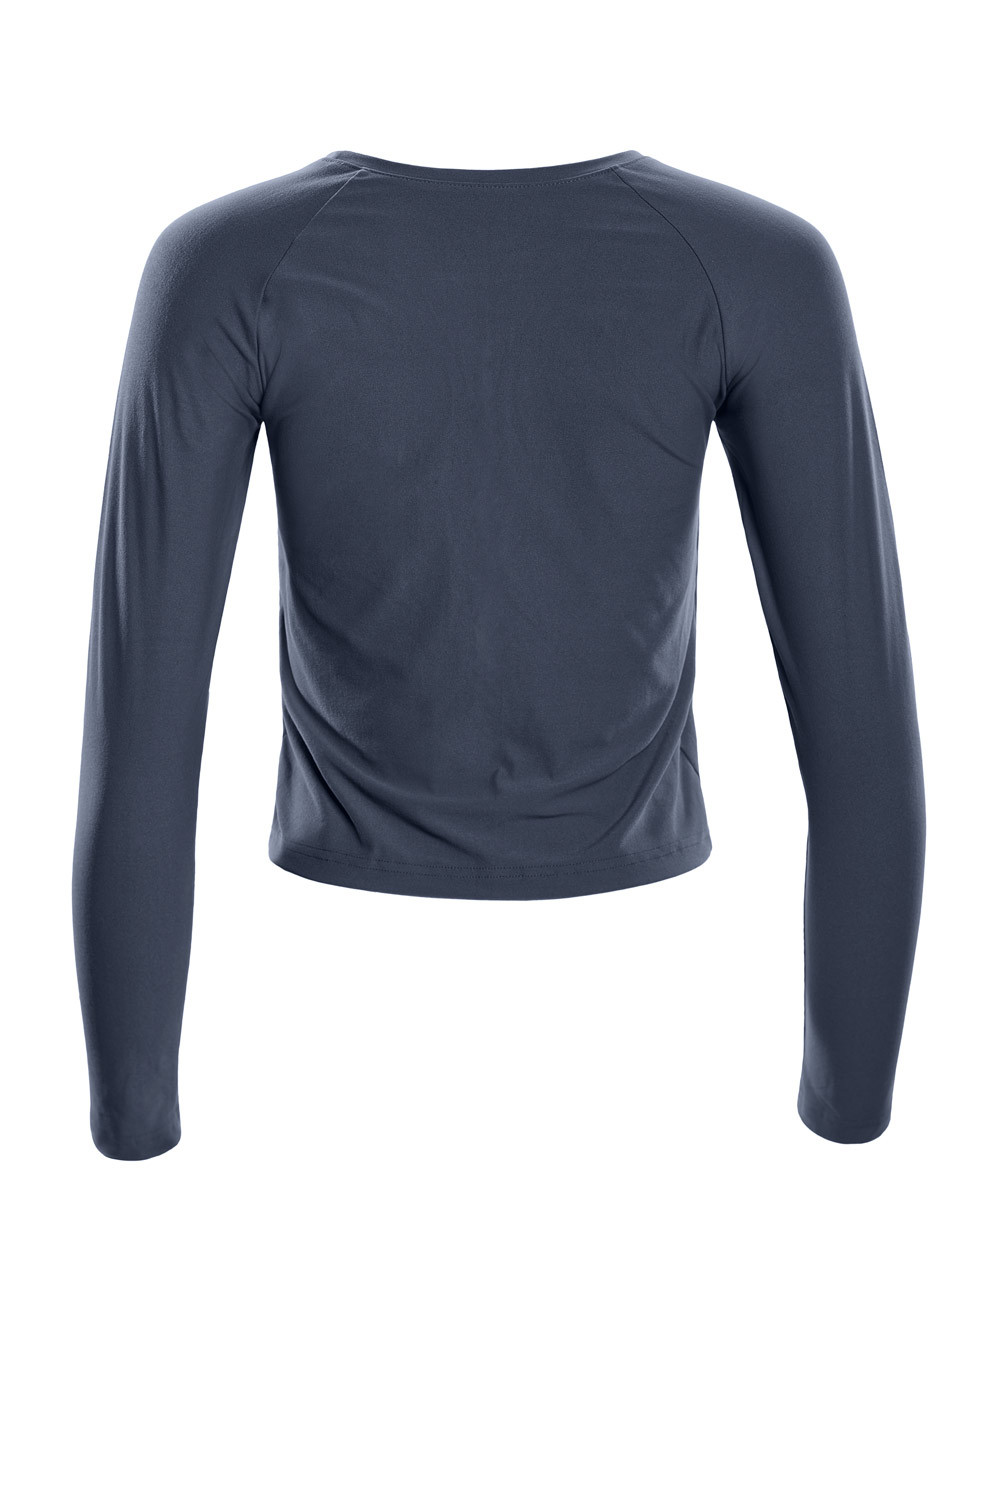 Soft and Long anthrazit, Soft Light Style Top Winshape Functional AET119LS, Cropped Ultra Sleeve